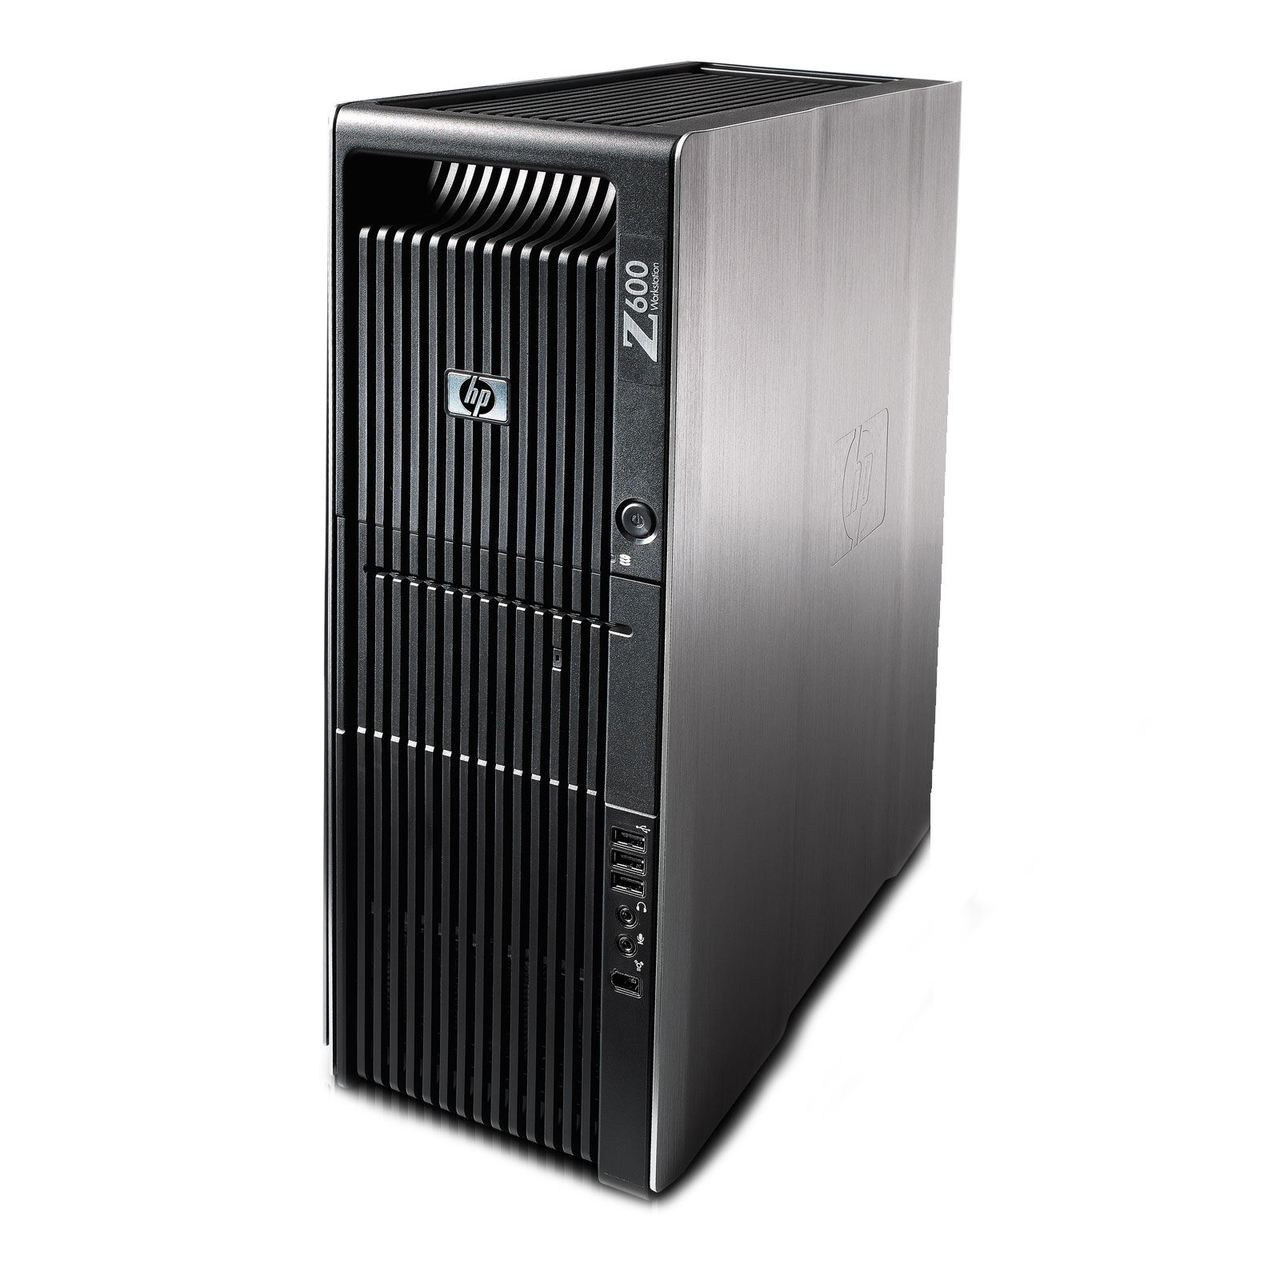 HP Z600 Workstation - front right view